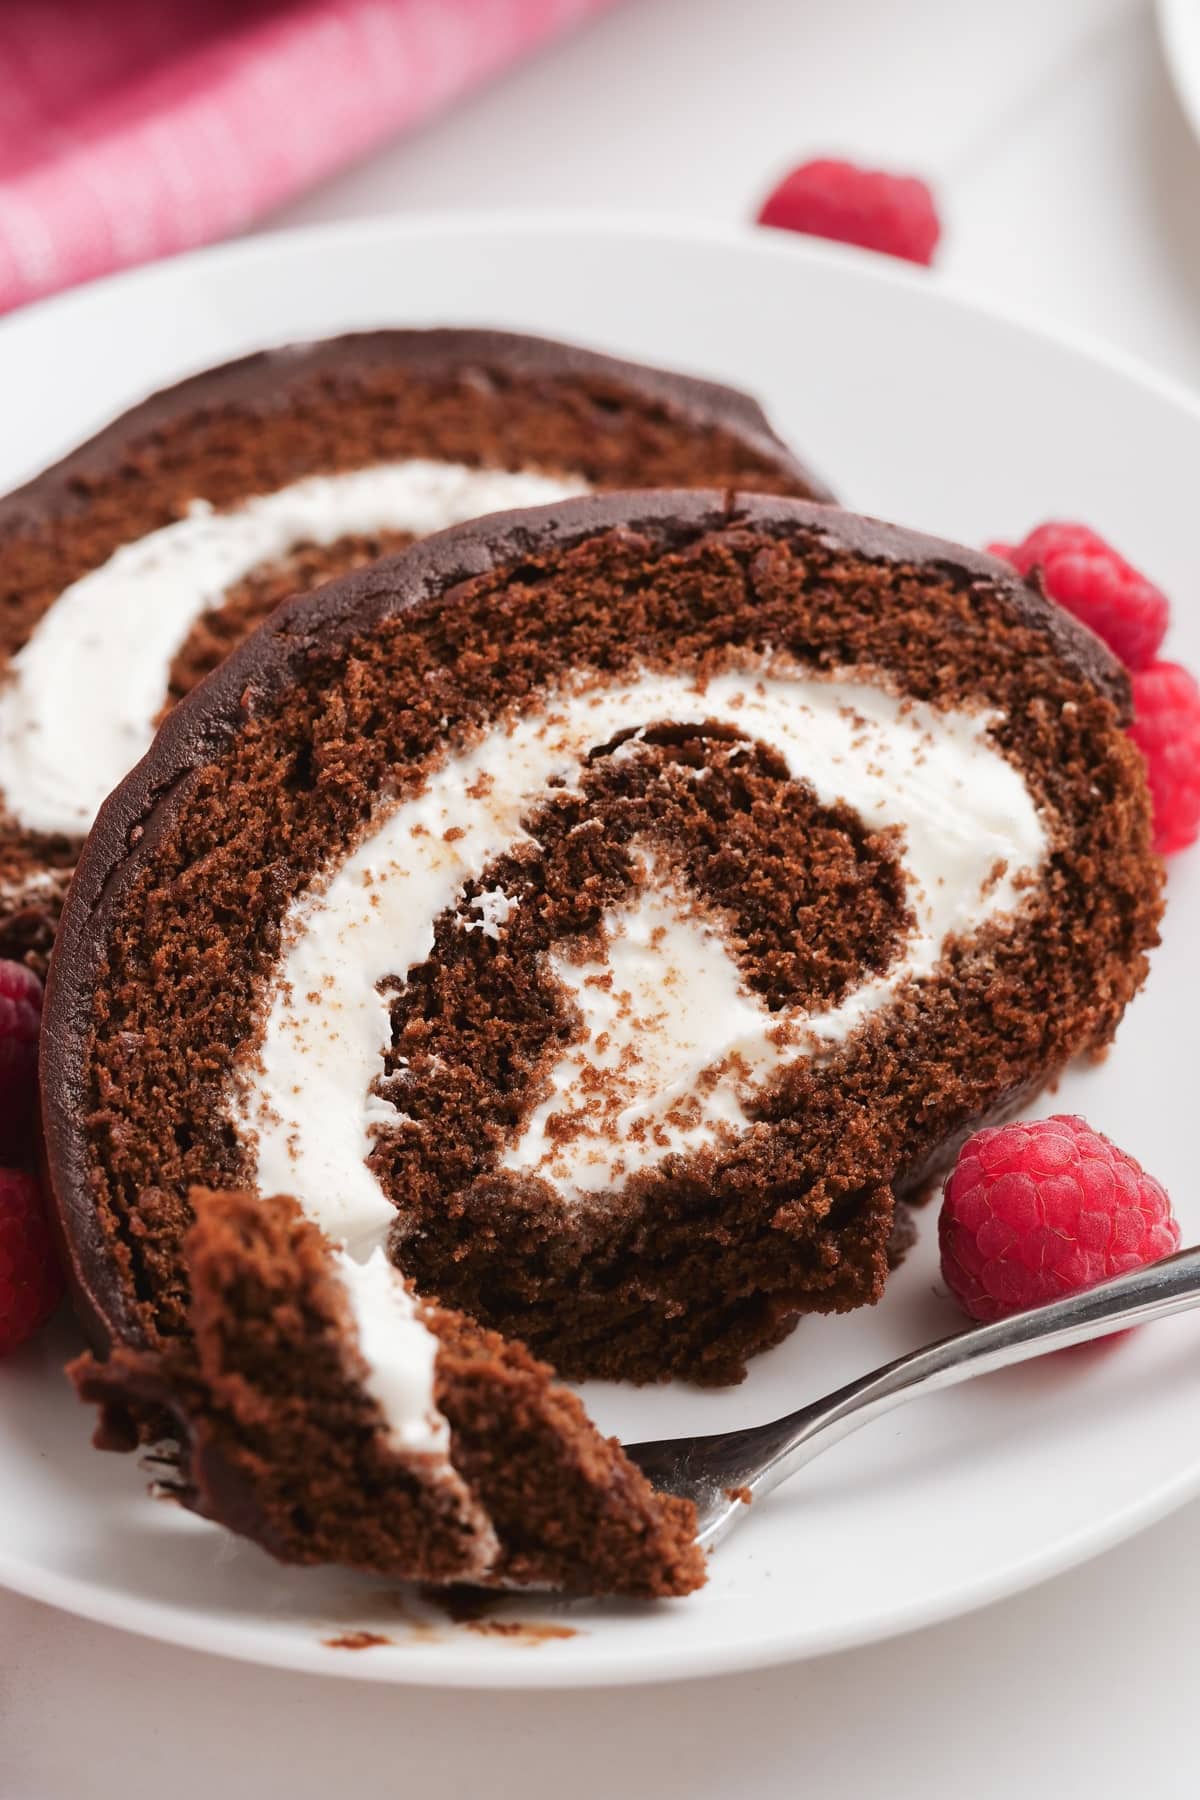 chocolate swiss roll slices on a plate with a fork